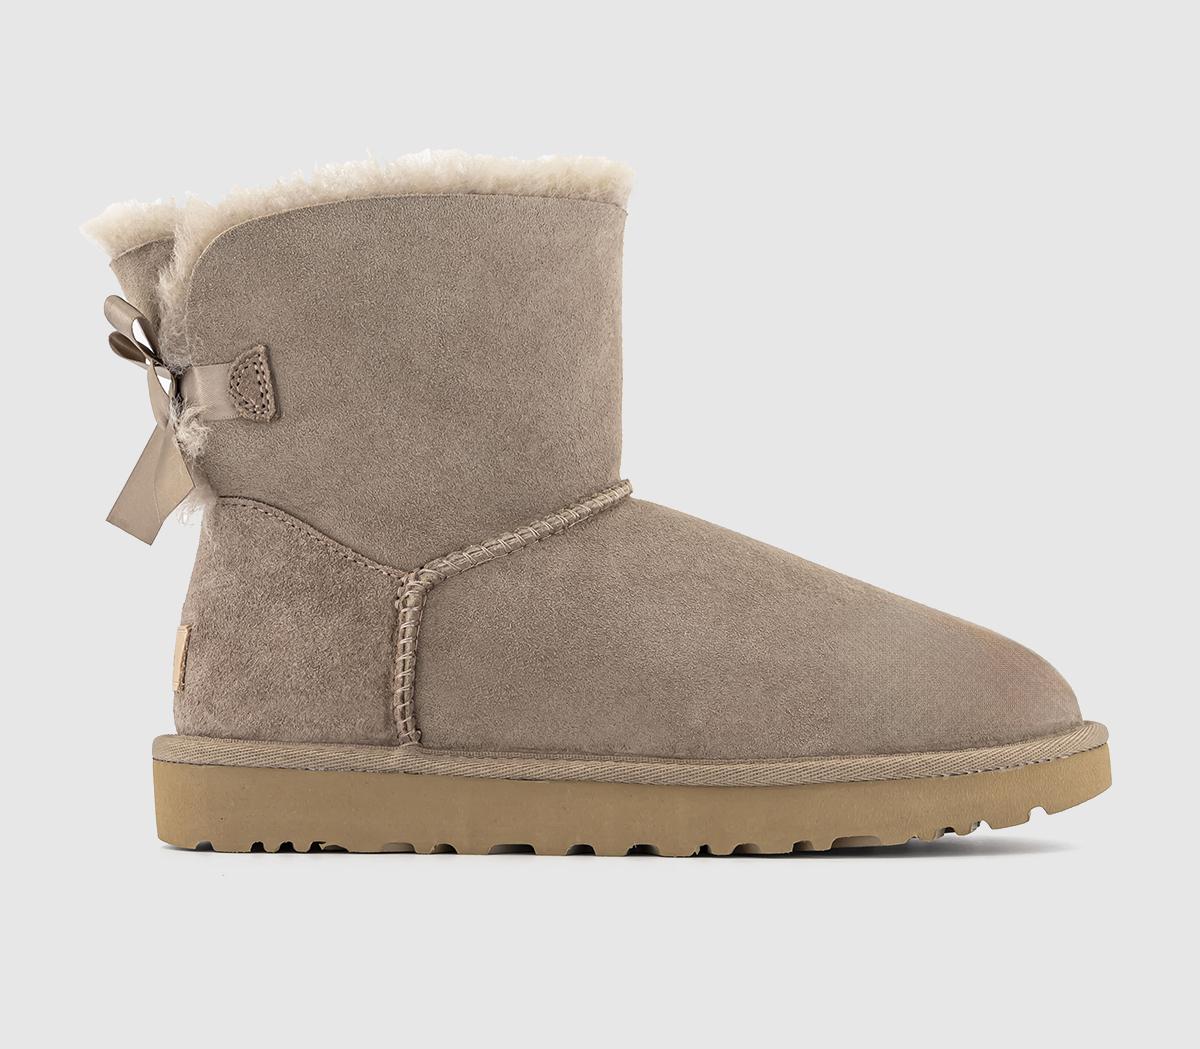 bailey bow uggs brown